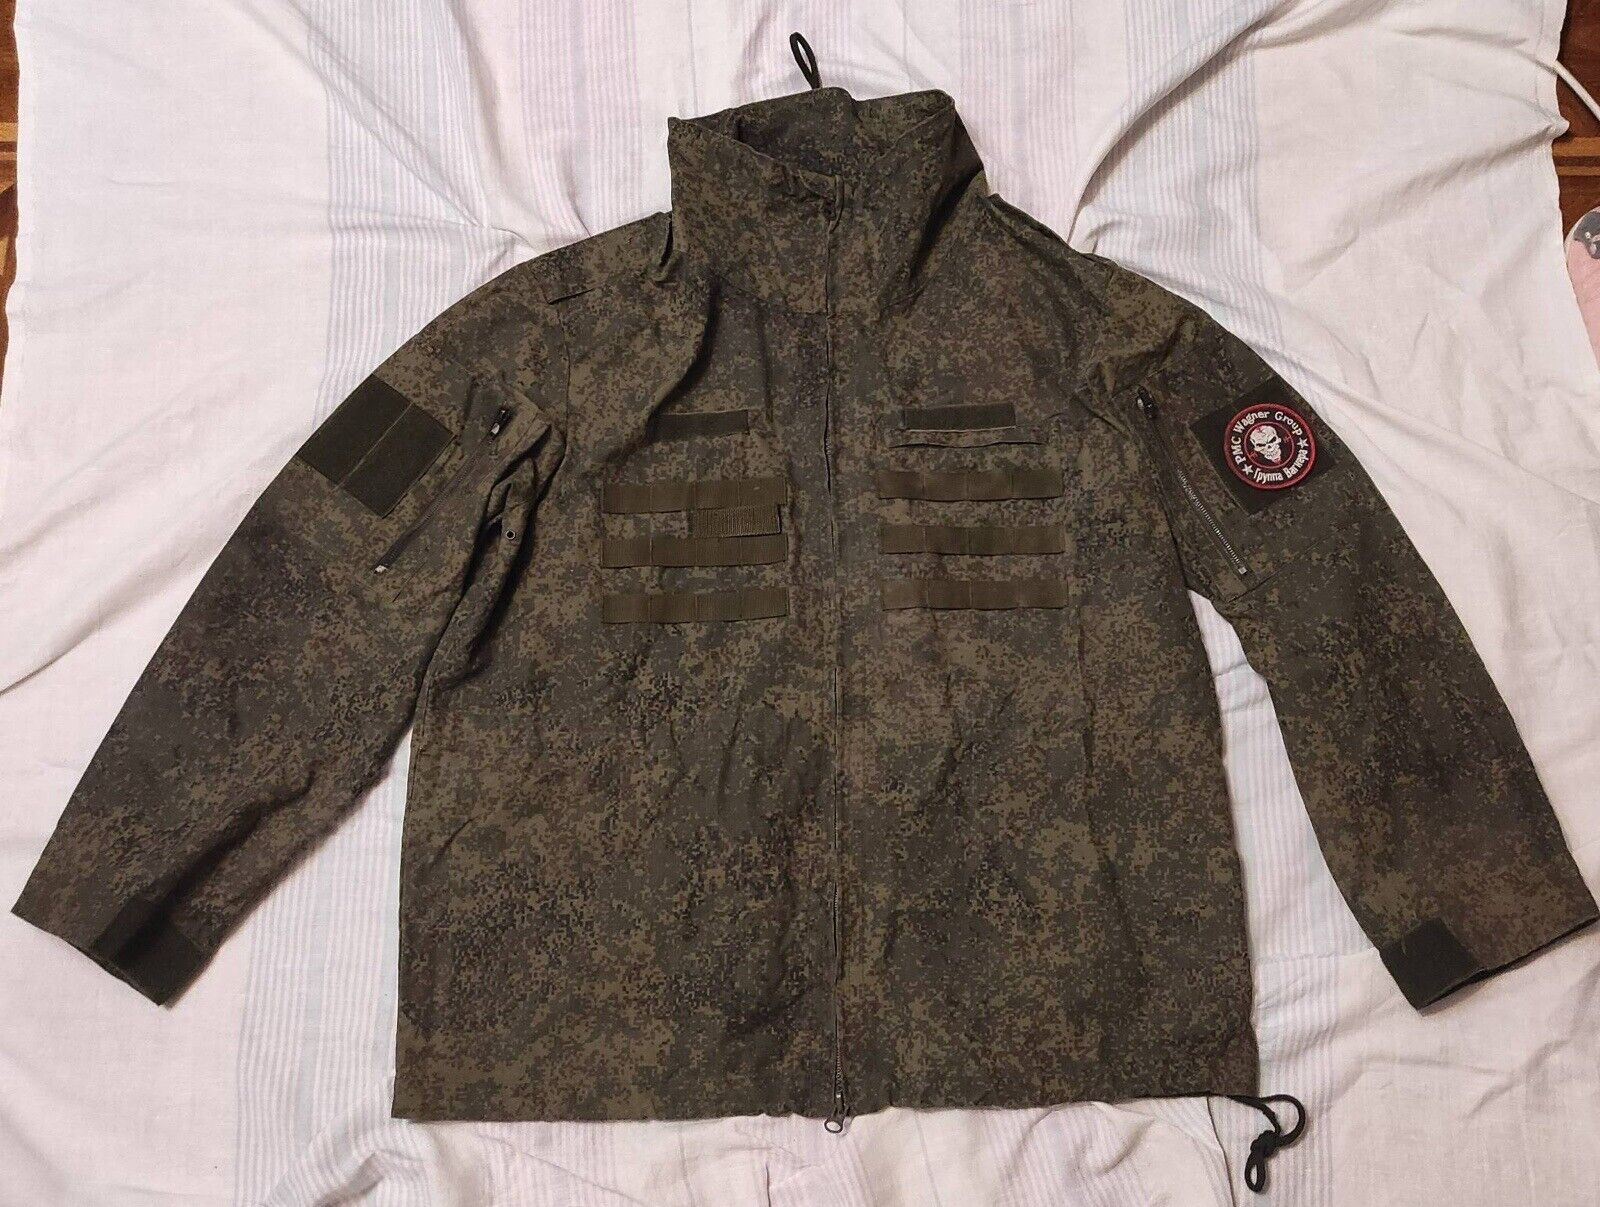 Russian Army 6B48 Uniform flame retardant Jacket with Patch